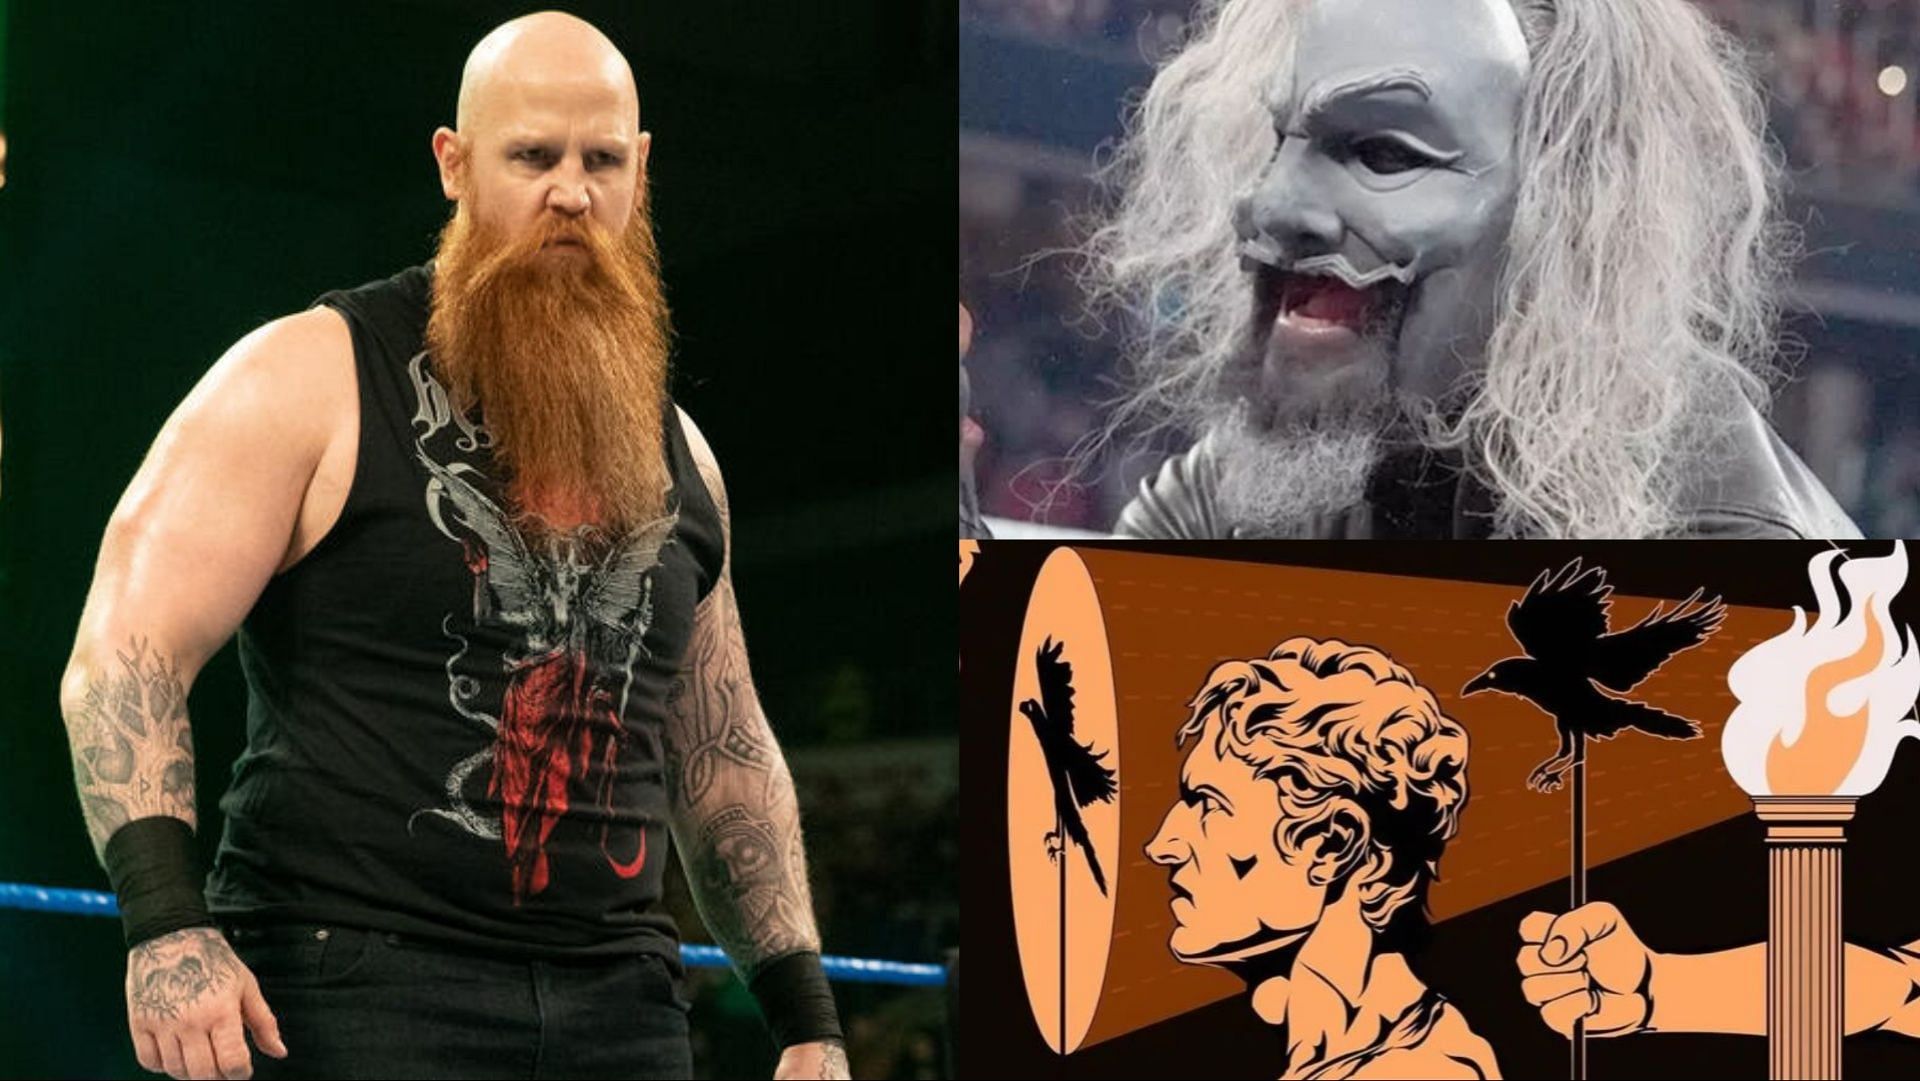 Will former Wyatt Family member Erick Rowan return to WWE and join Uncle Howdy?